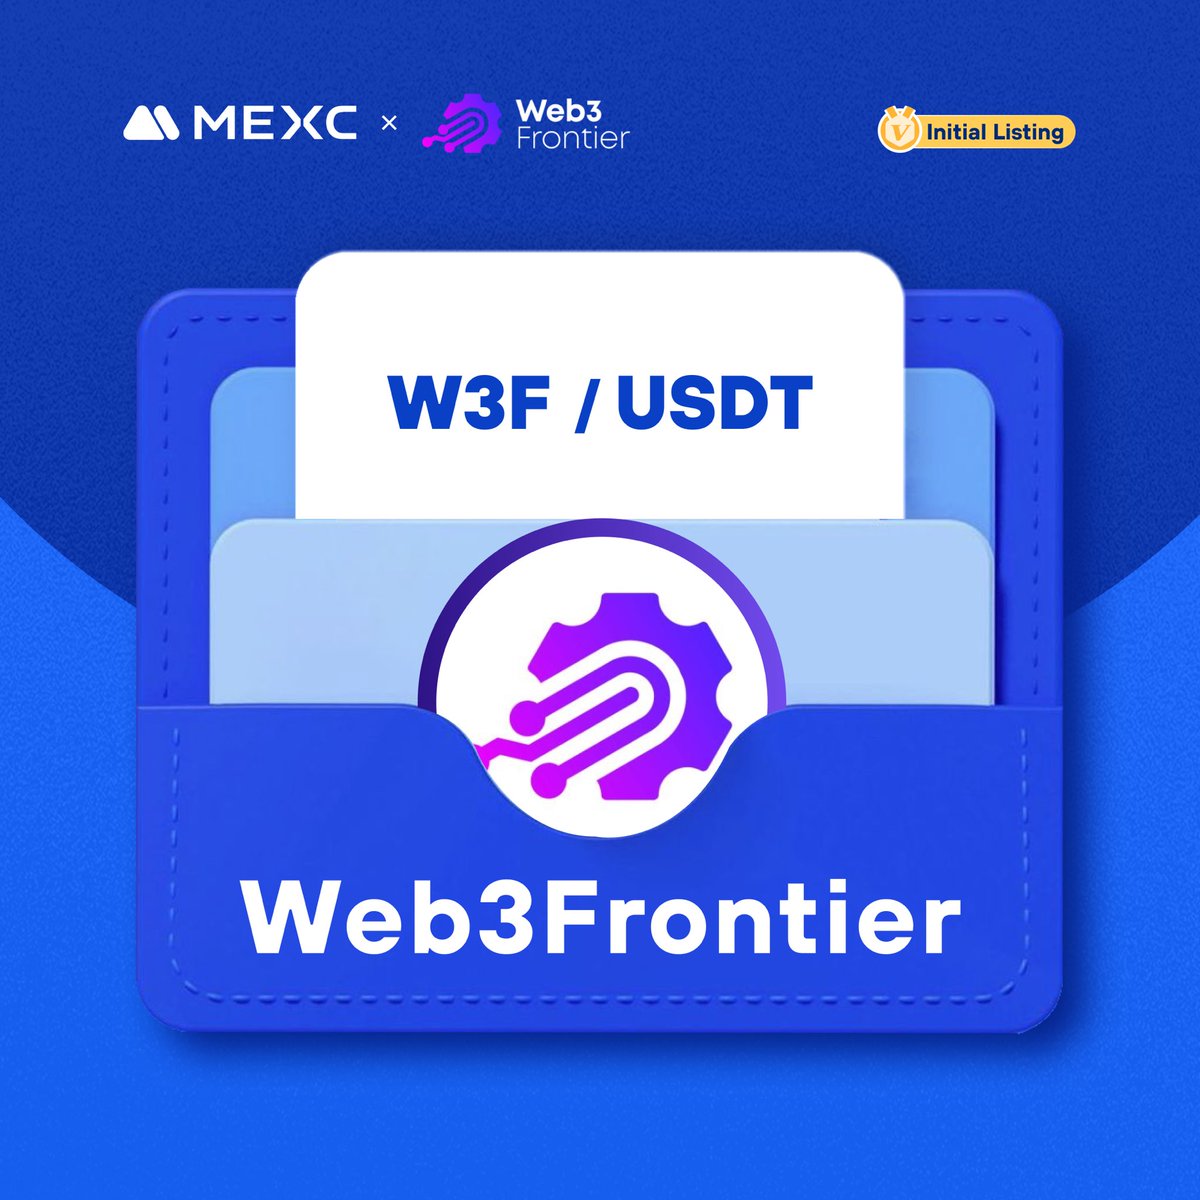 🚀 Dive into the world of @Web3Frontier1 , the ultimate web3 social network! With seamless crypto integration, creators empower users to truly own their digital presence, content, and interactions. 💰 Trade W3F tokens at $1.46 on top exchanges like @MEXC_Official and @indodax .